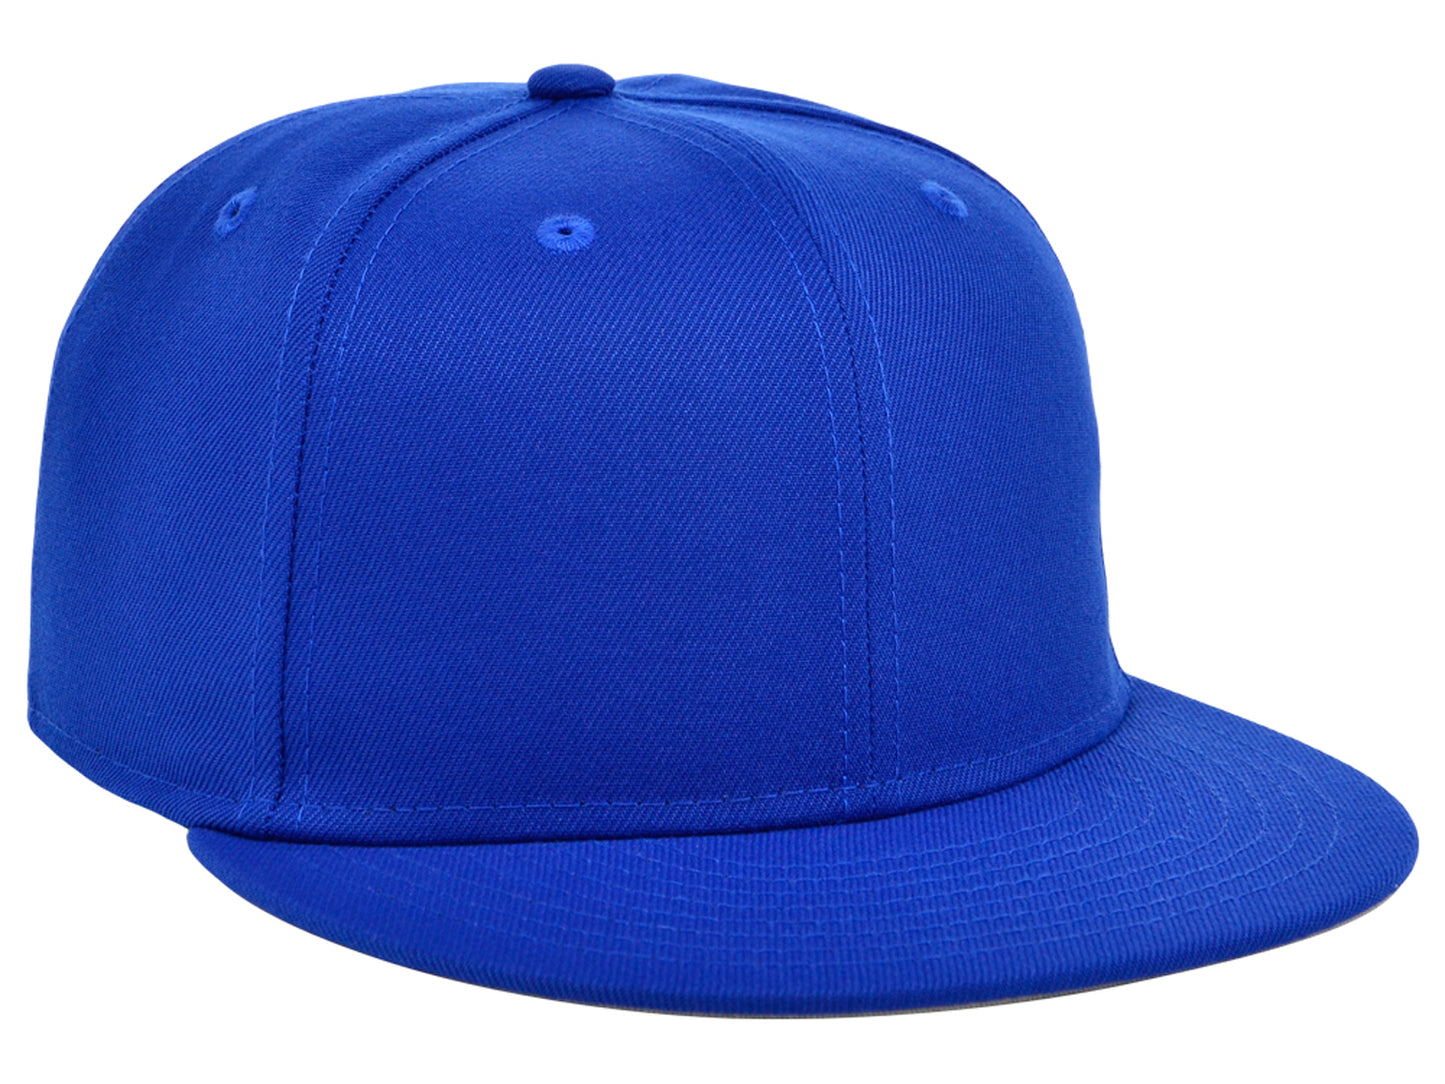 Crowns By Lids Full Court Fitted Cap - Royal Blue